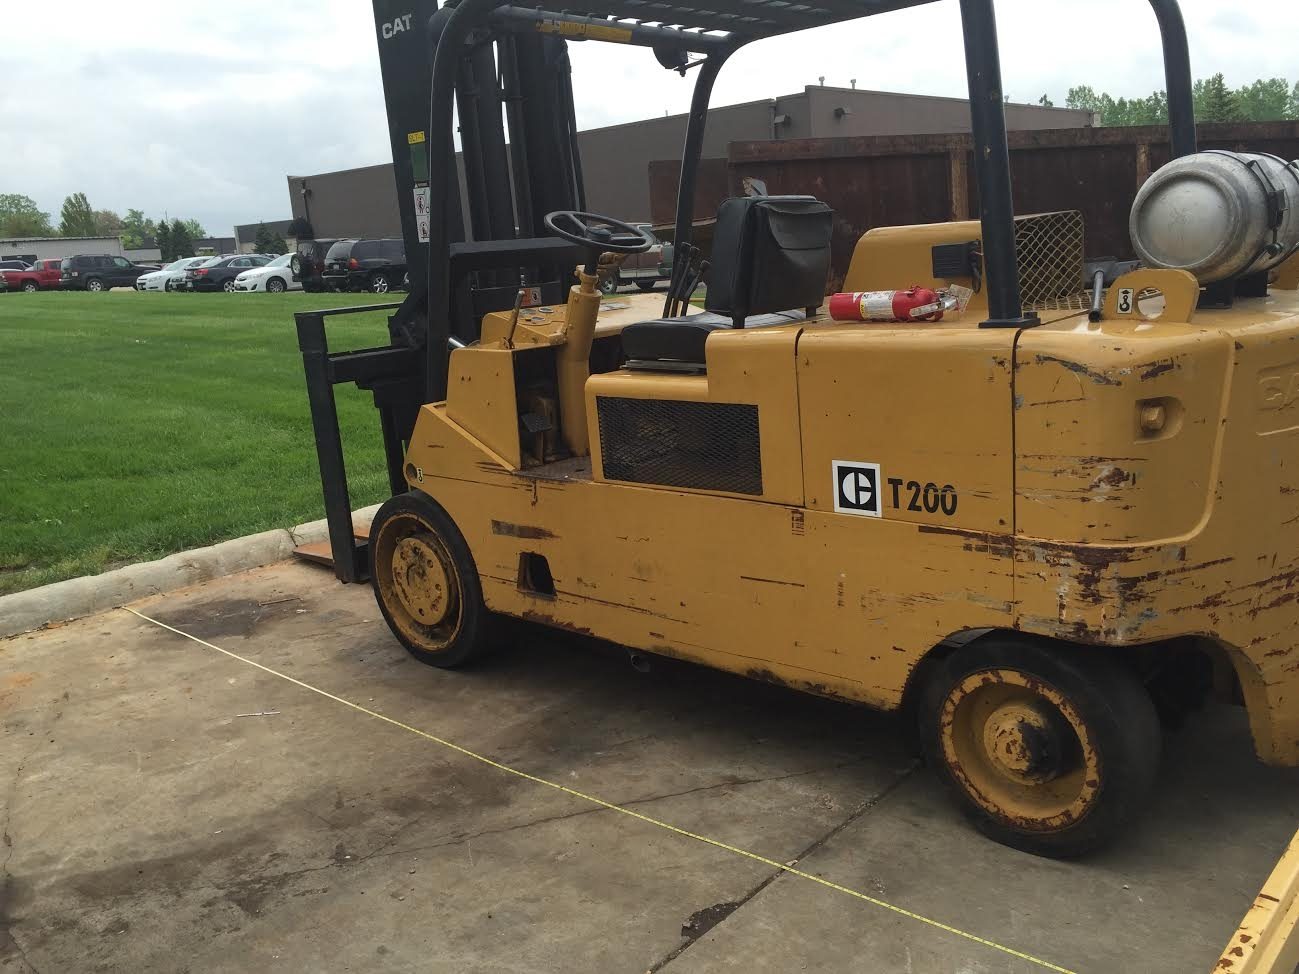 20 000lb Cat Royal Forklift For Sale Used Call 616 200 4308affordable Machinery